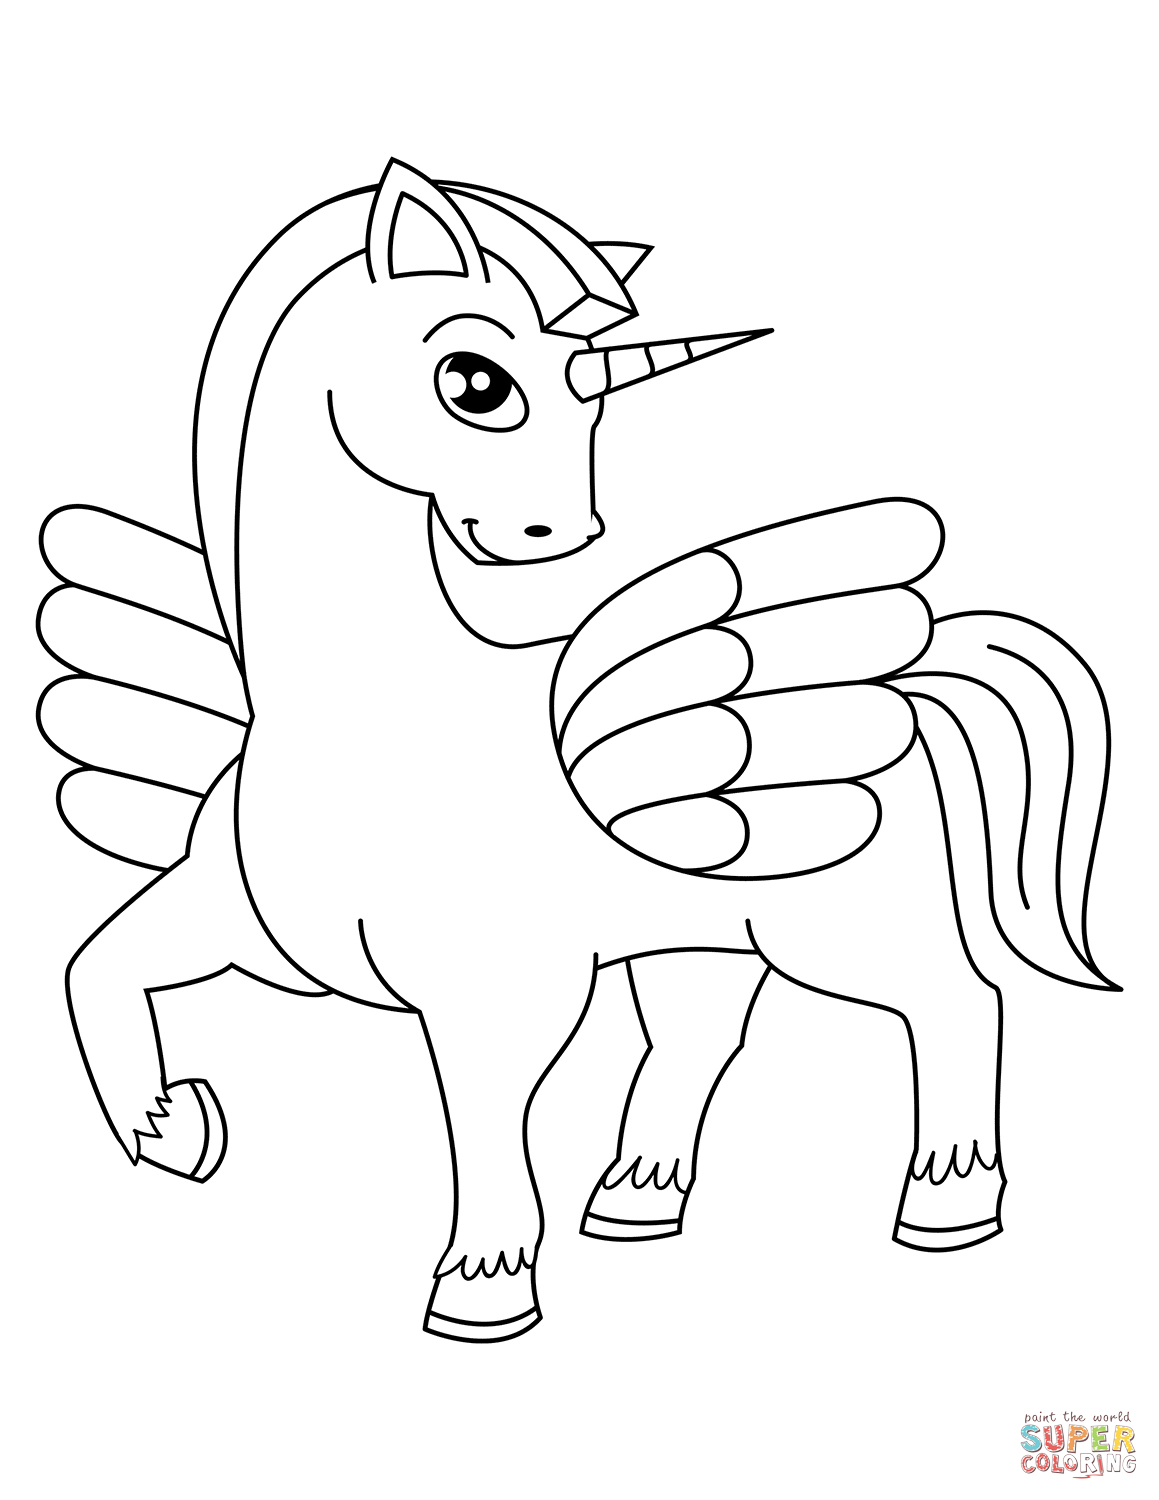 Unicorn Coloring Pages Online Cute Winged Unicorn Coloring Page Free Printable Coloring Pages